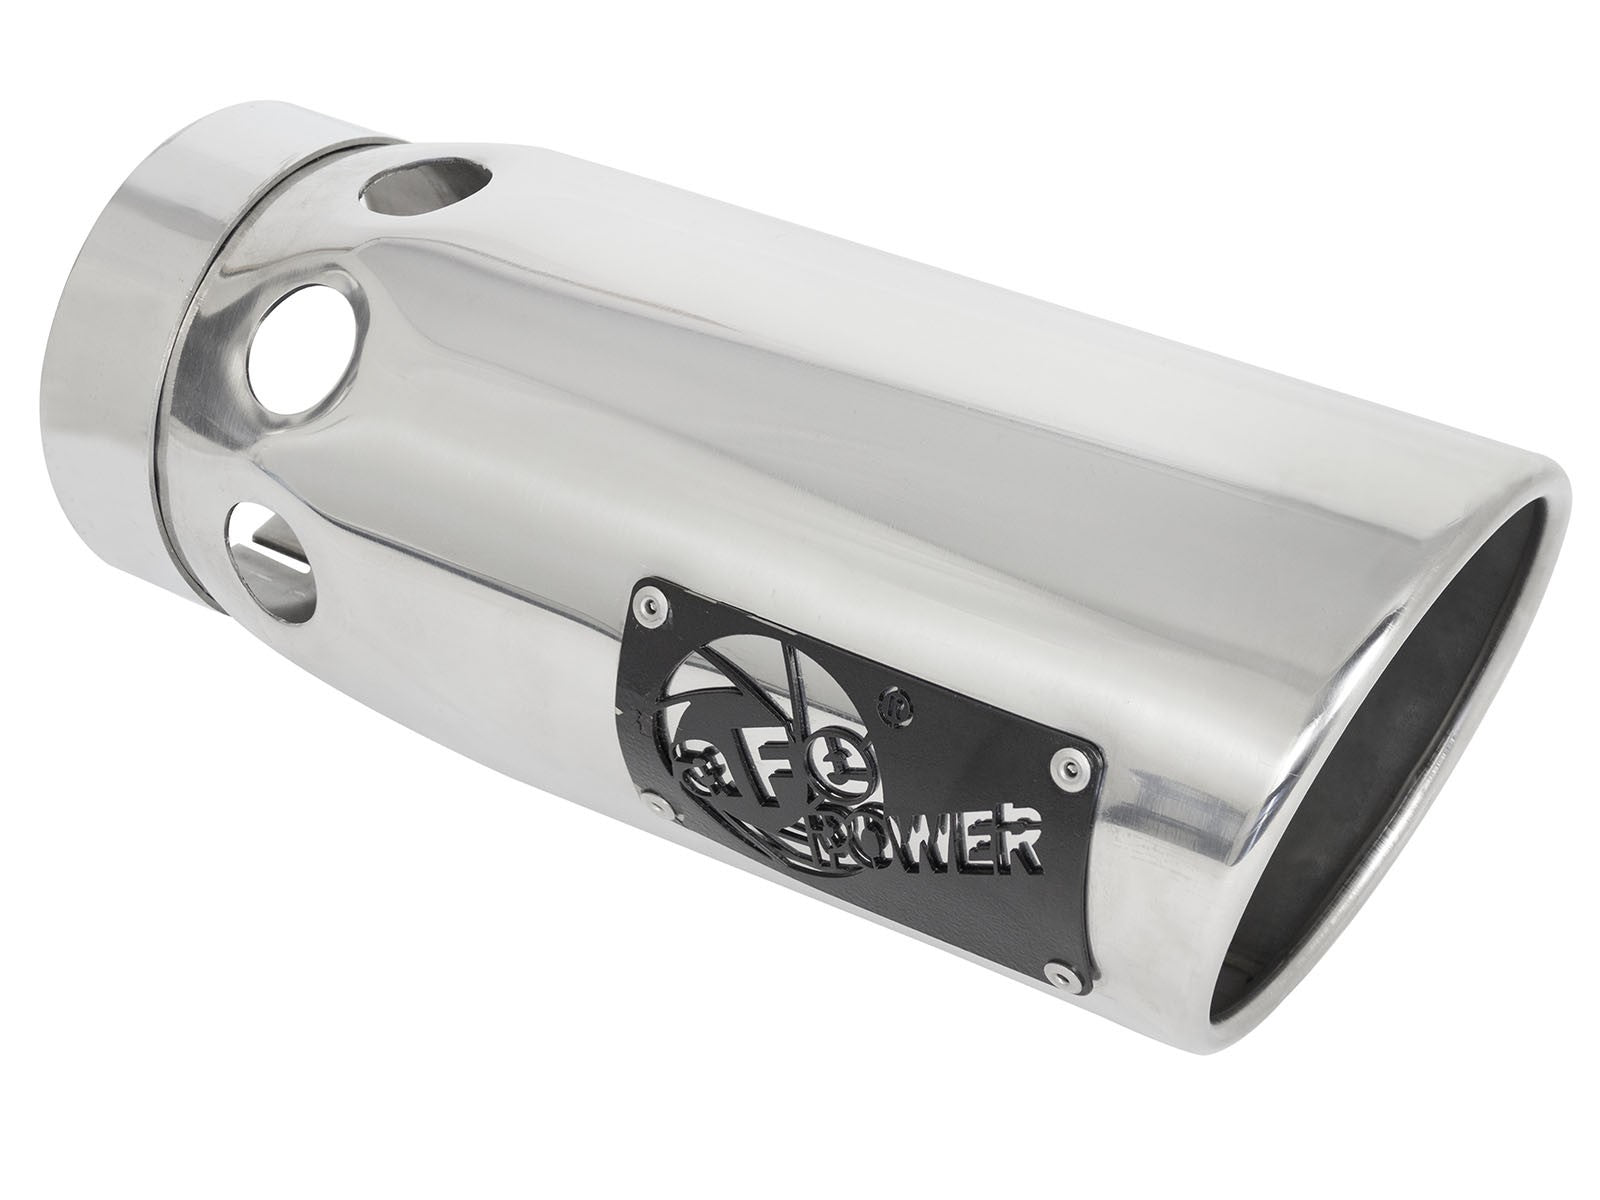 MACH Force-Xp 304 Stainless Steel Intercooled Clamp-on Exhaust Tip Polished 5 IN Inlet x 6 IN Outlet x 16 IN L